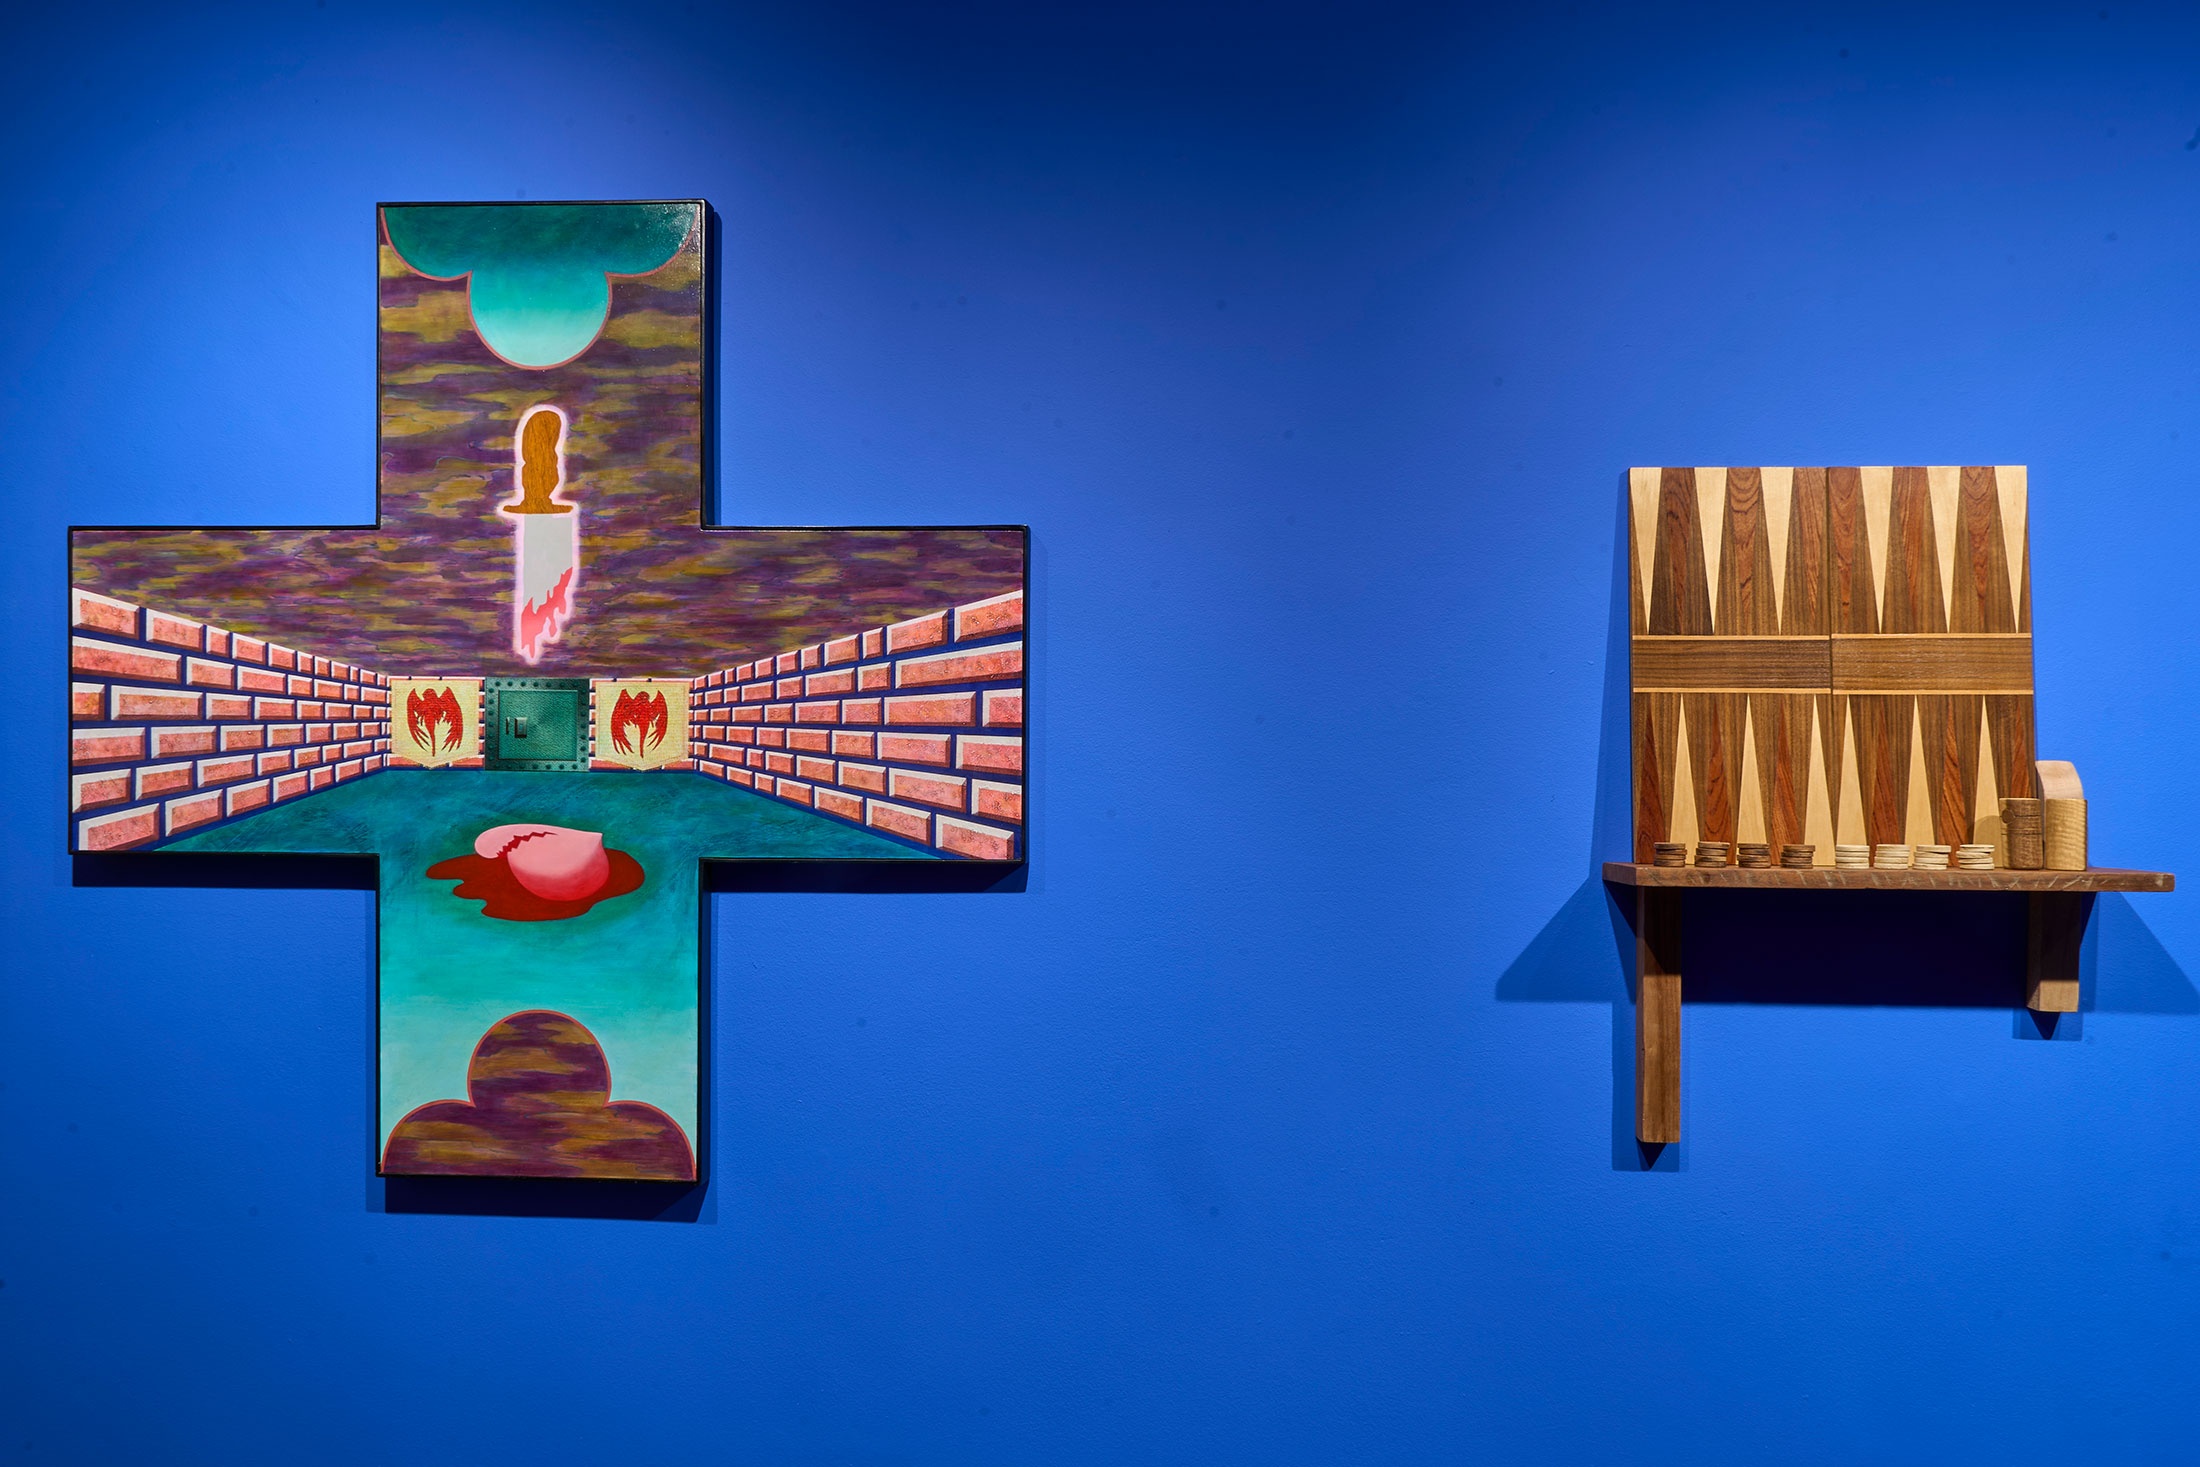 Installation photograph from the ‘Funhouse’ exhibition in A4’s Goods project space. On the left, Gitte Möller’s ‘Pushy Passion,’ oil and collage on a panel in the shape of an equal-armed cross. On the right, Rowan Smith’s ‘Untitled (Backgammon),’ a sculptural work made from carved wood that resembles a backgammon board and set pieces.
